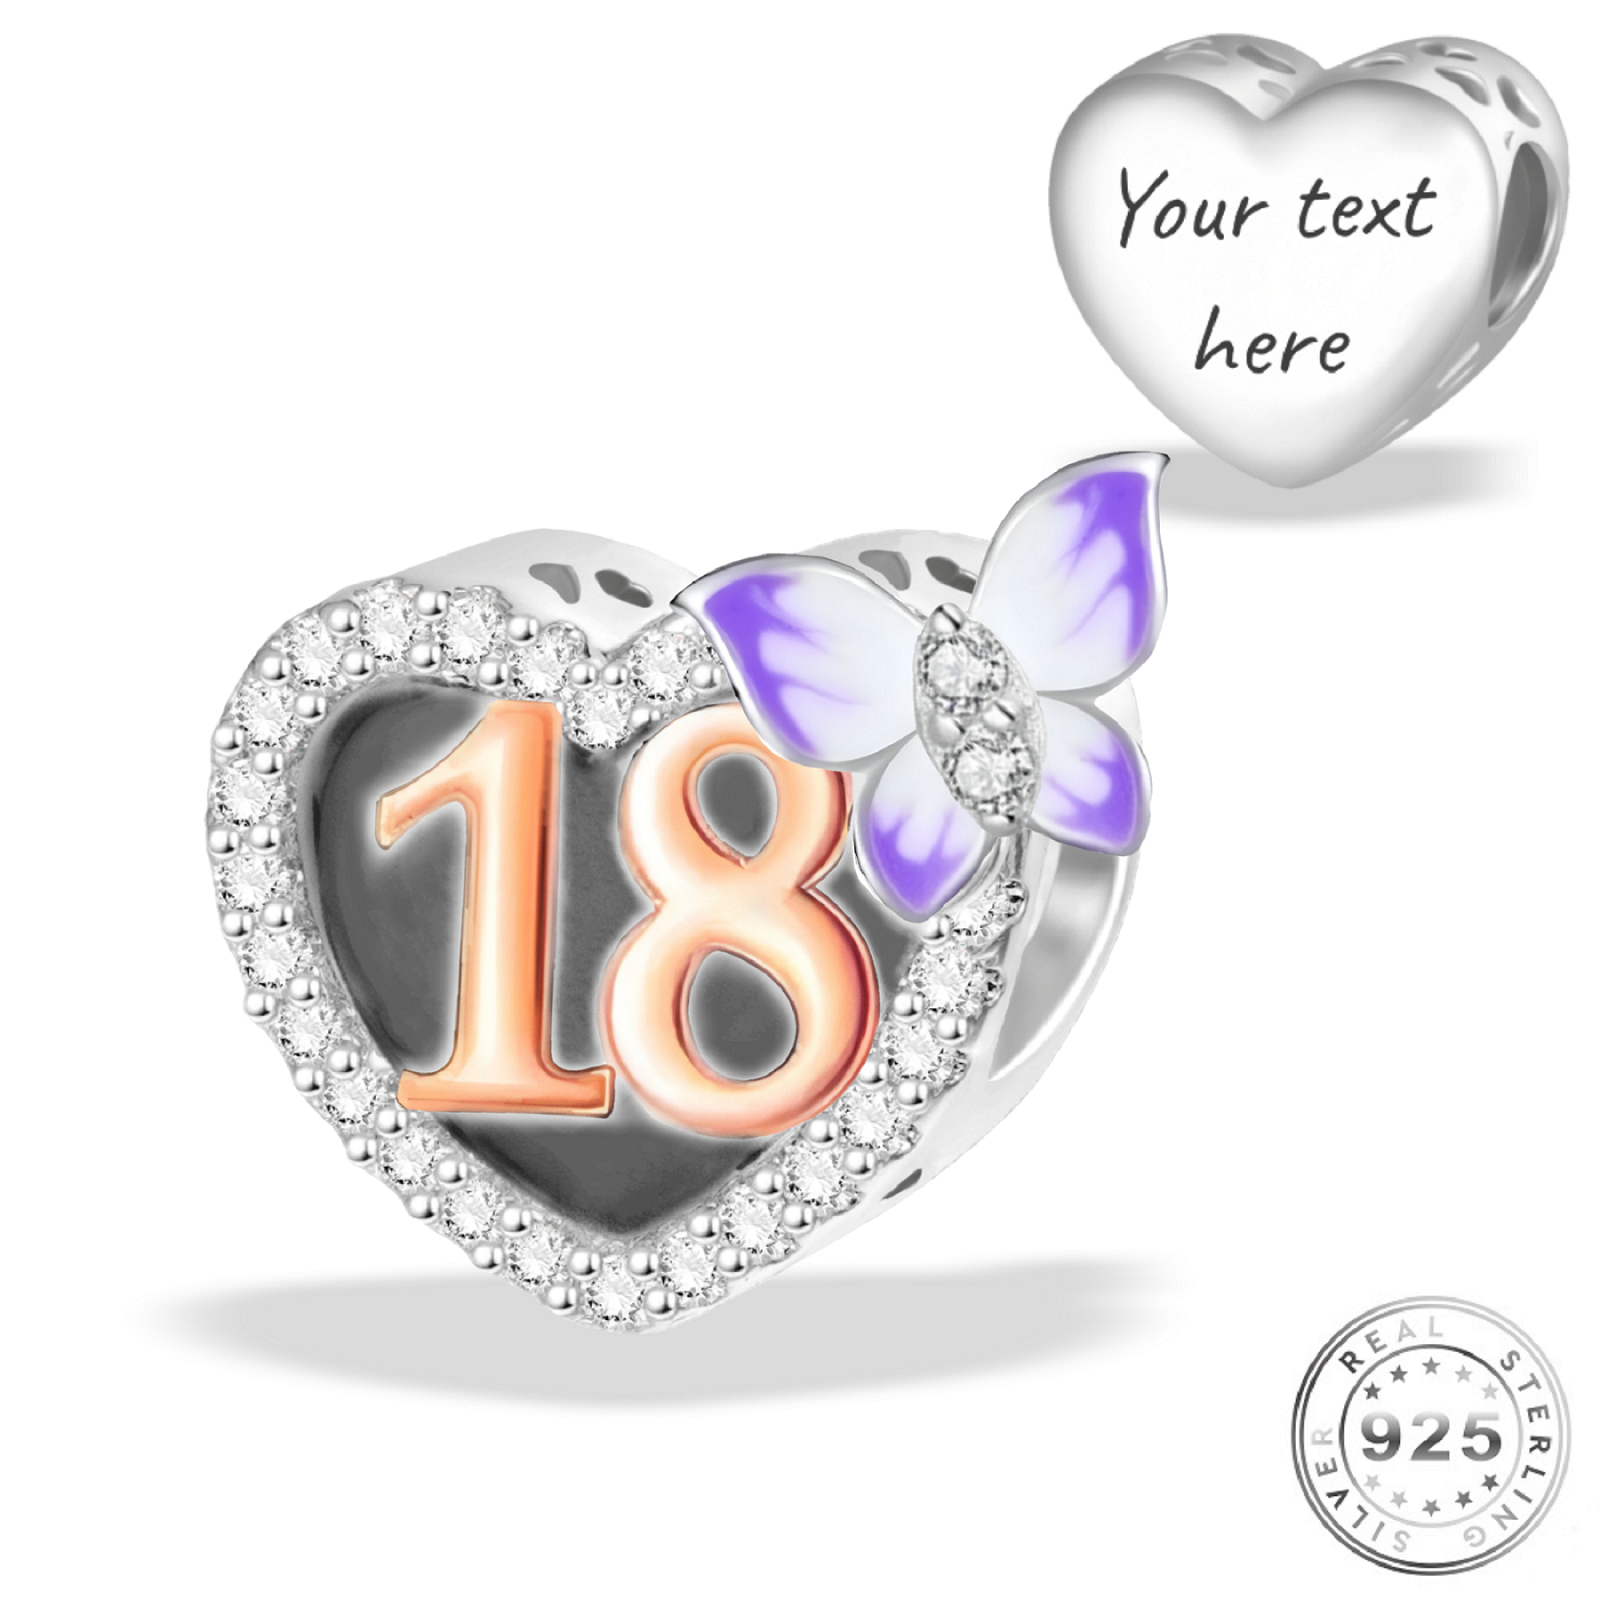 Happy Birthday Cake Candle Mothers Day Charms 925 Silver Bead For Pandora  Bracelet DIY Fine Bangle Jewelry From Lyypandora, $6.09 | DHgate.Com